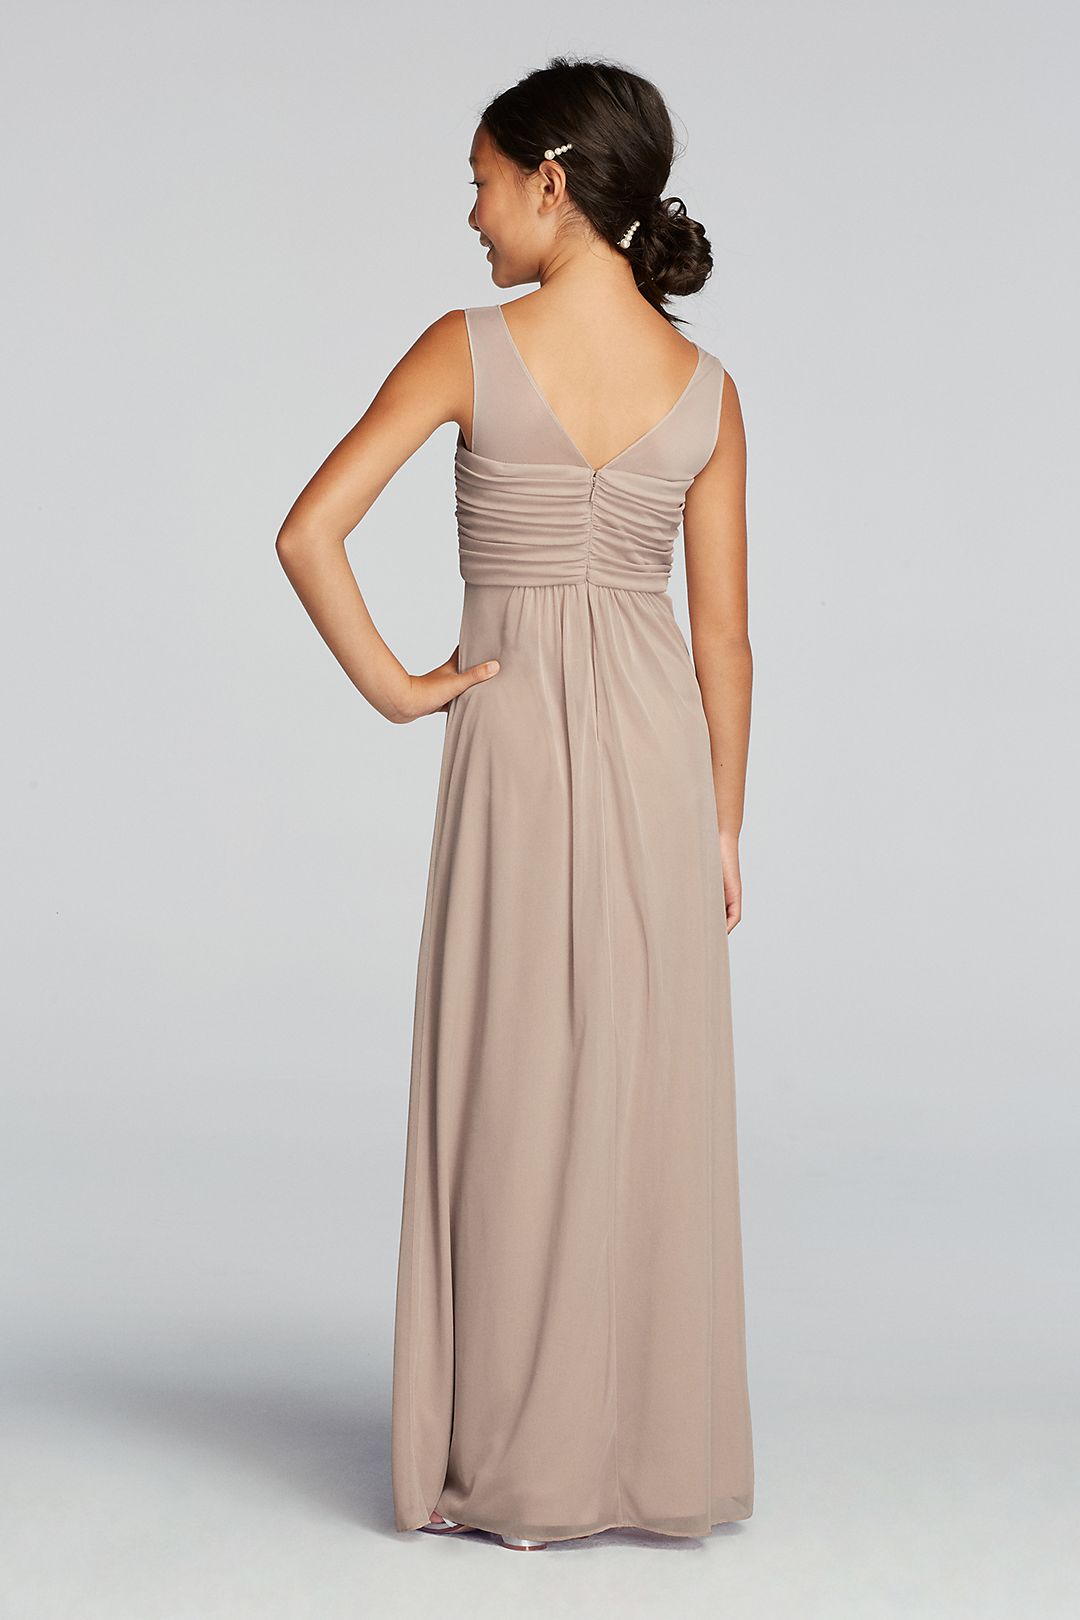 Long Mesh Dress with Illusion Tank Ruched Bodice Image 2